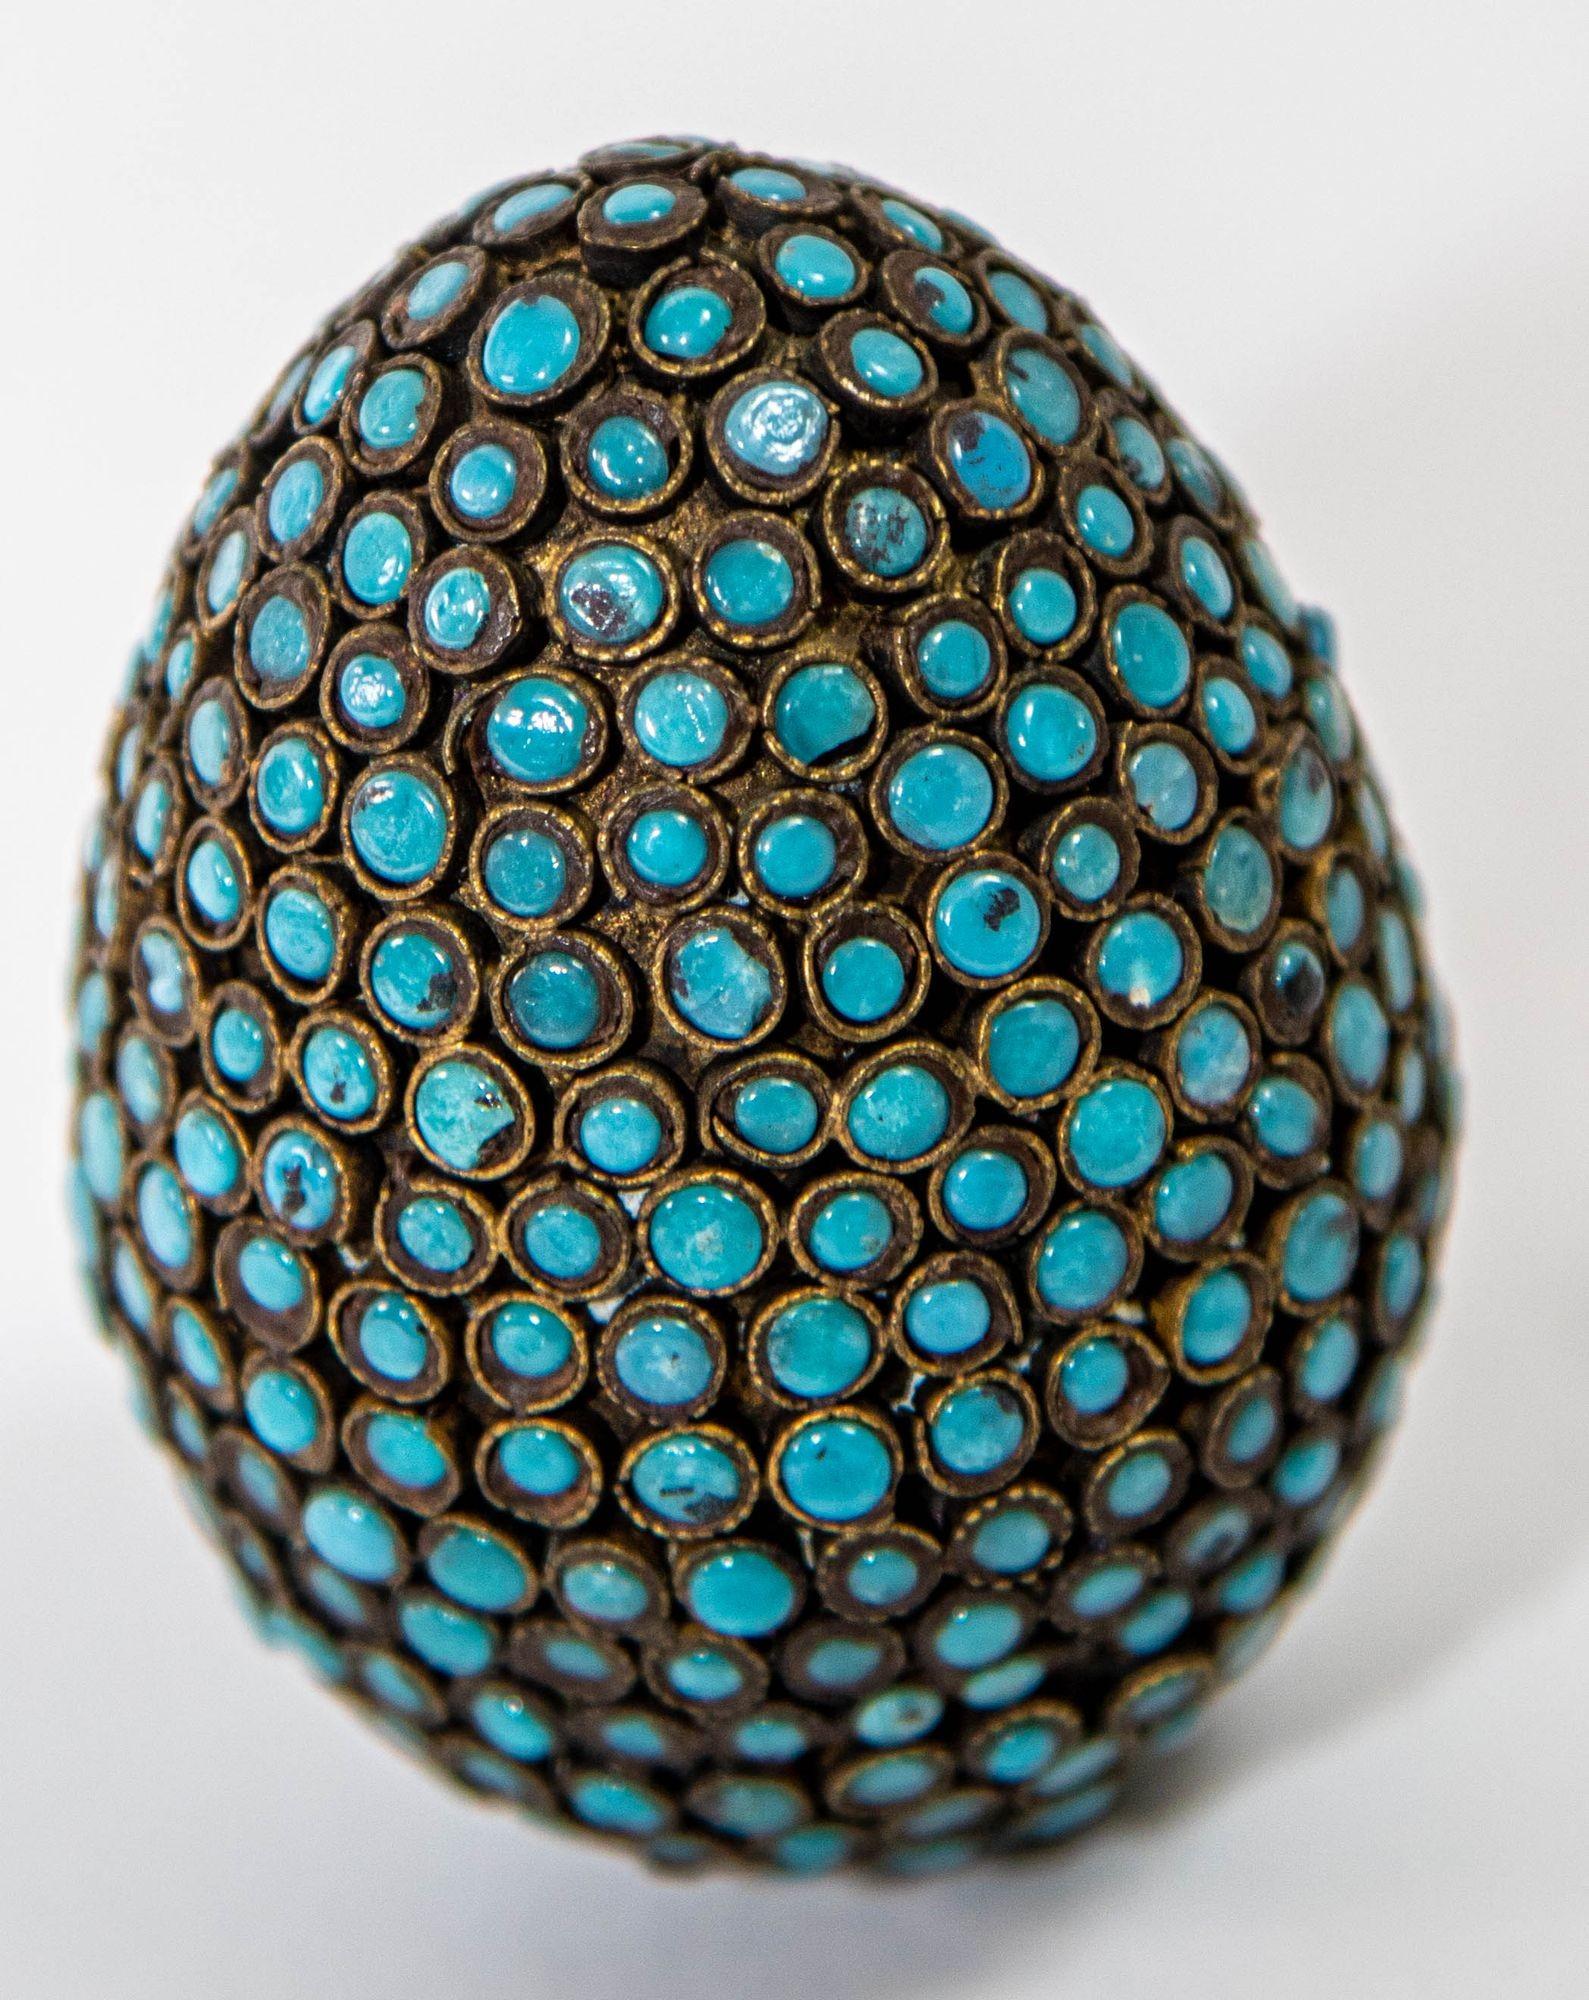 Antique Tibetan Egg Shaped Box with Turquoise Blue Stone Inlay For Sale 5